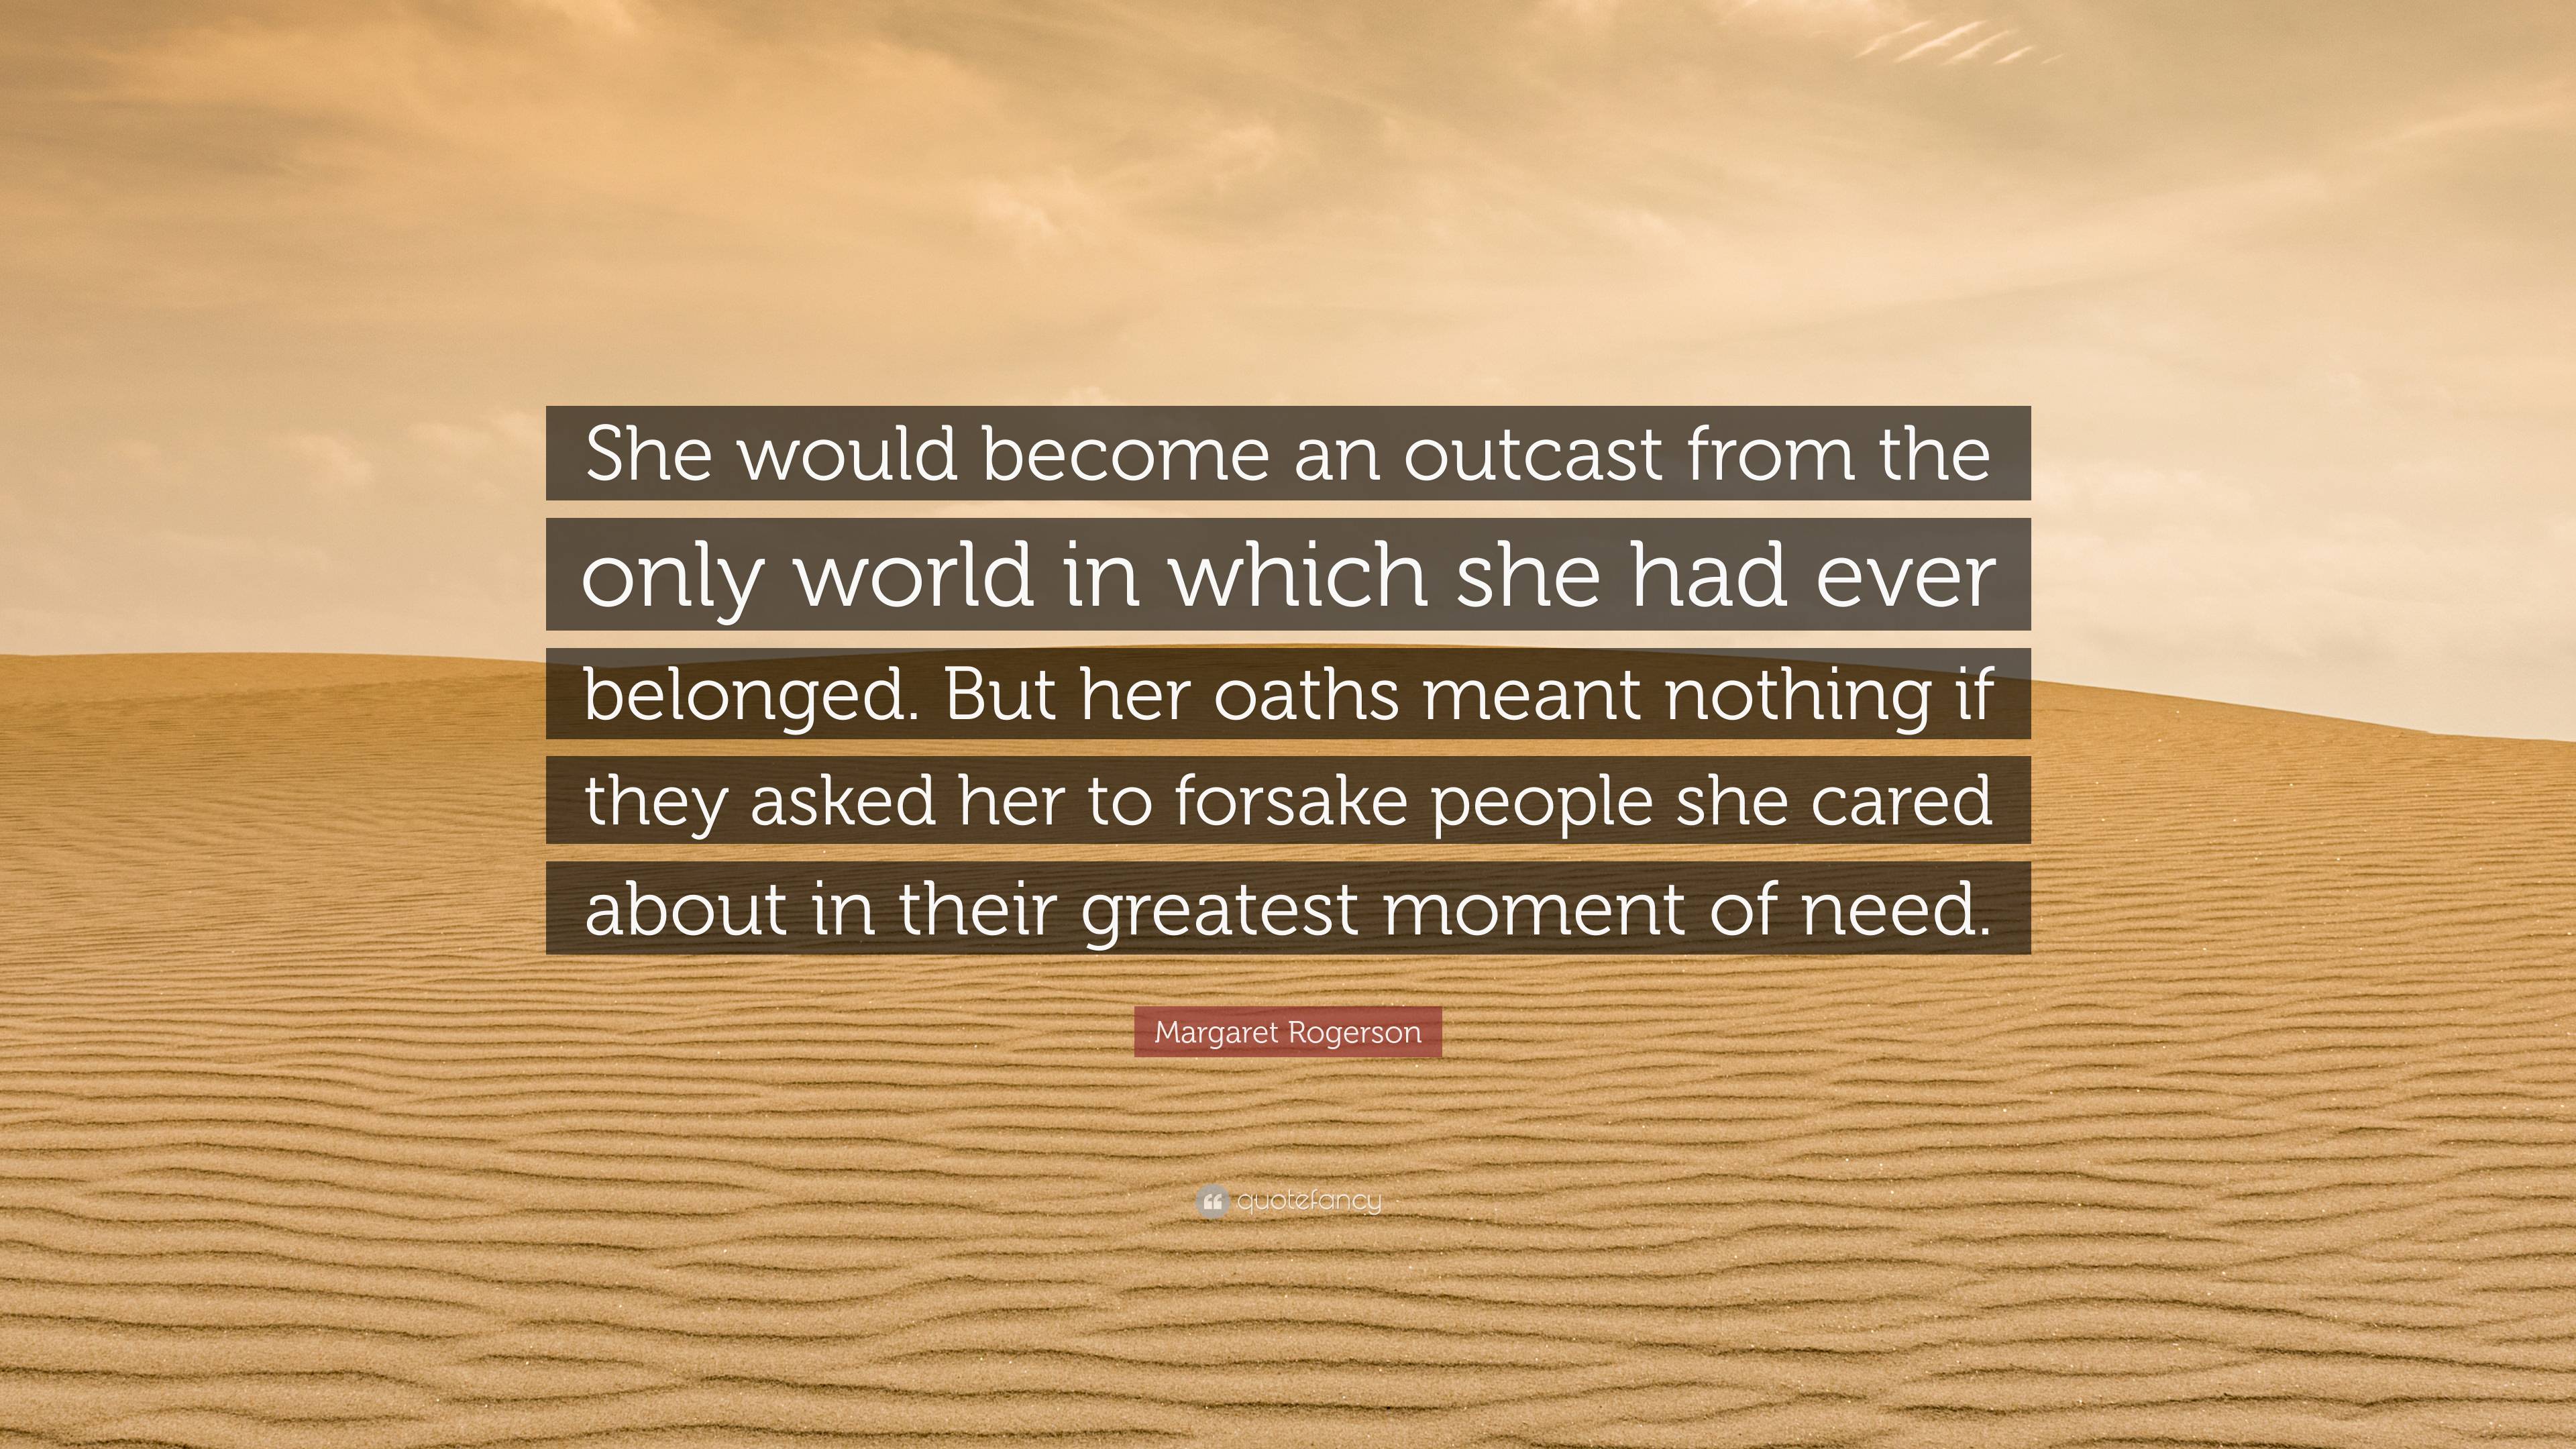 Margaret Rogerson Quote: “She would become an outcast from the only ...